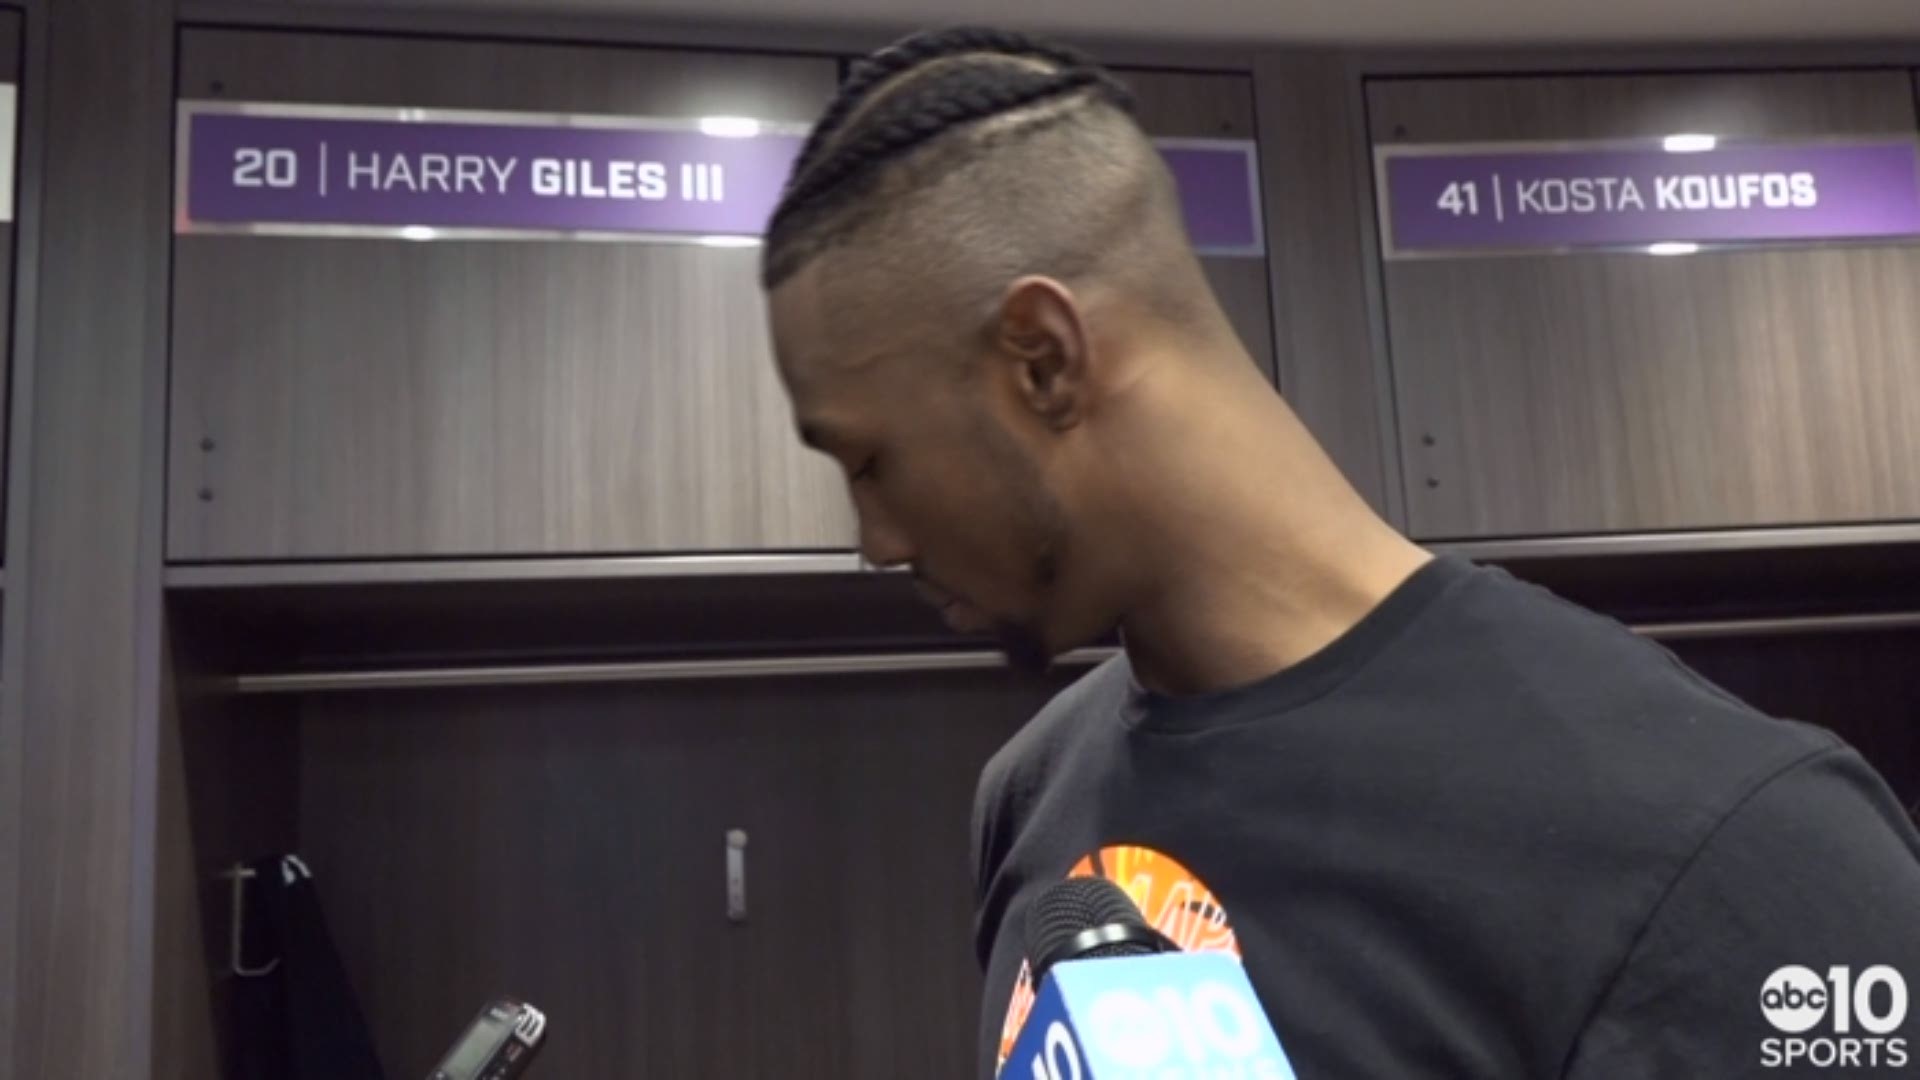 Harry Giles talks about his career-high 20 point performance following the Kings 135-113 victory over the Atlanta Hawks on Wednesday, his team's improved pace, heading into February with a winning record and who the "Block Boys" are.